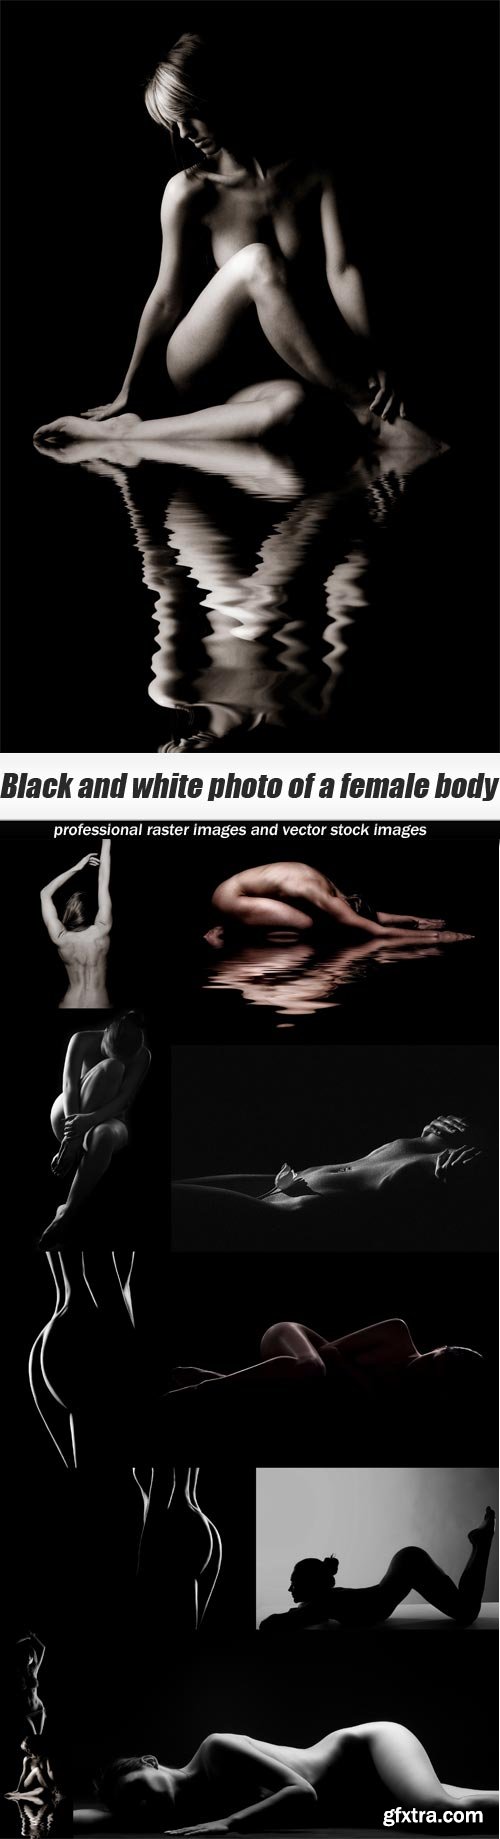 Black and white photo of a female body